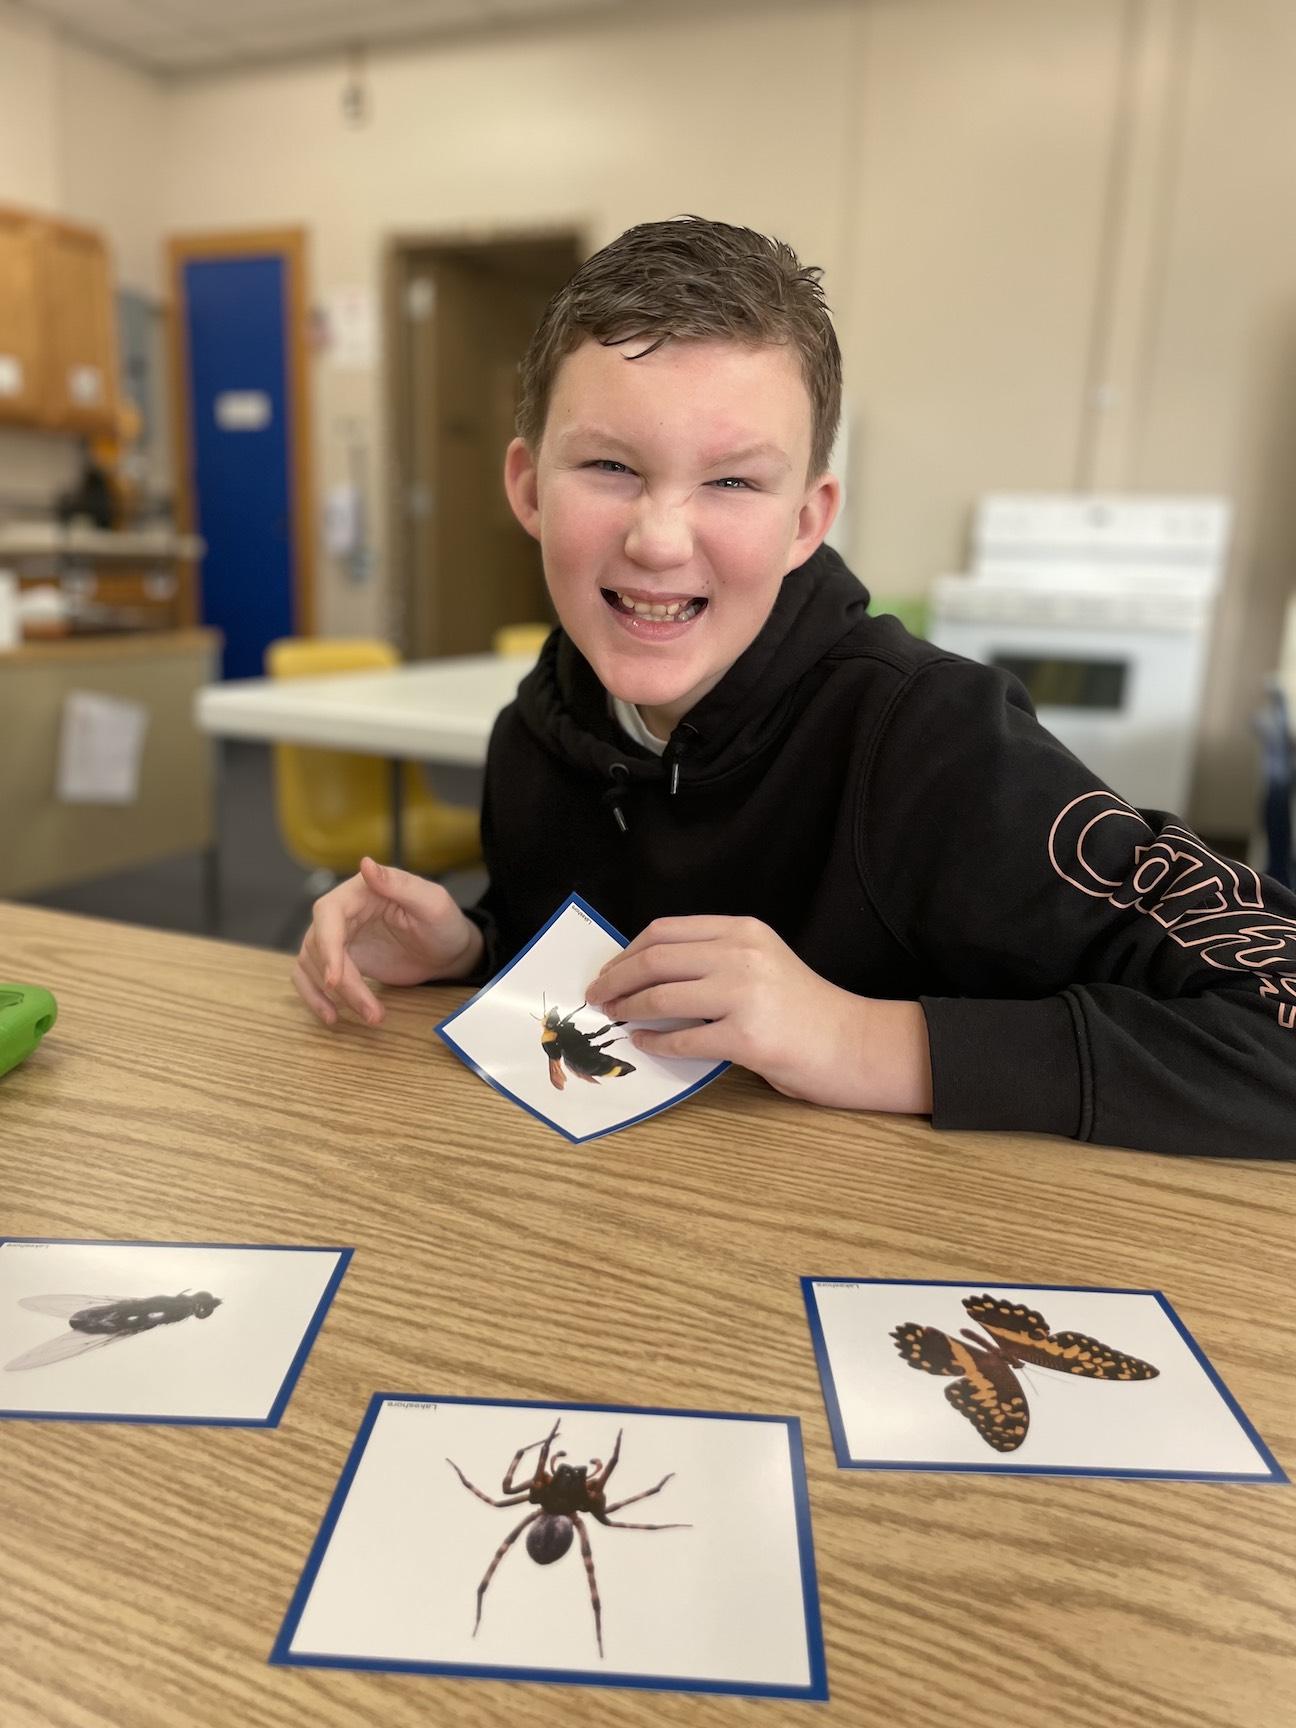 Caad Costelnock practices labeling and learning new facts about objects in the bug category